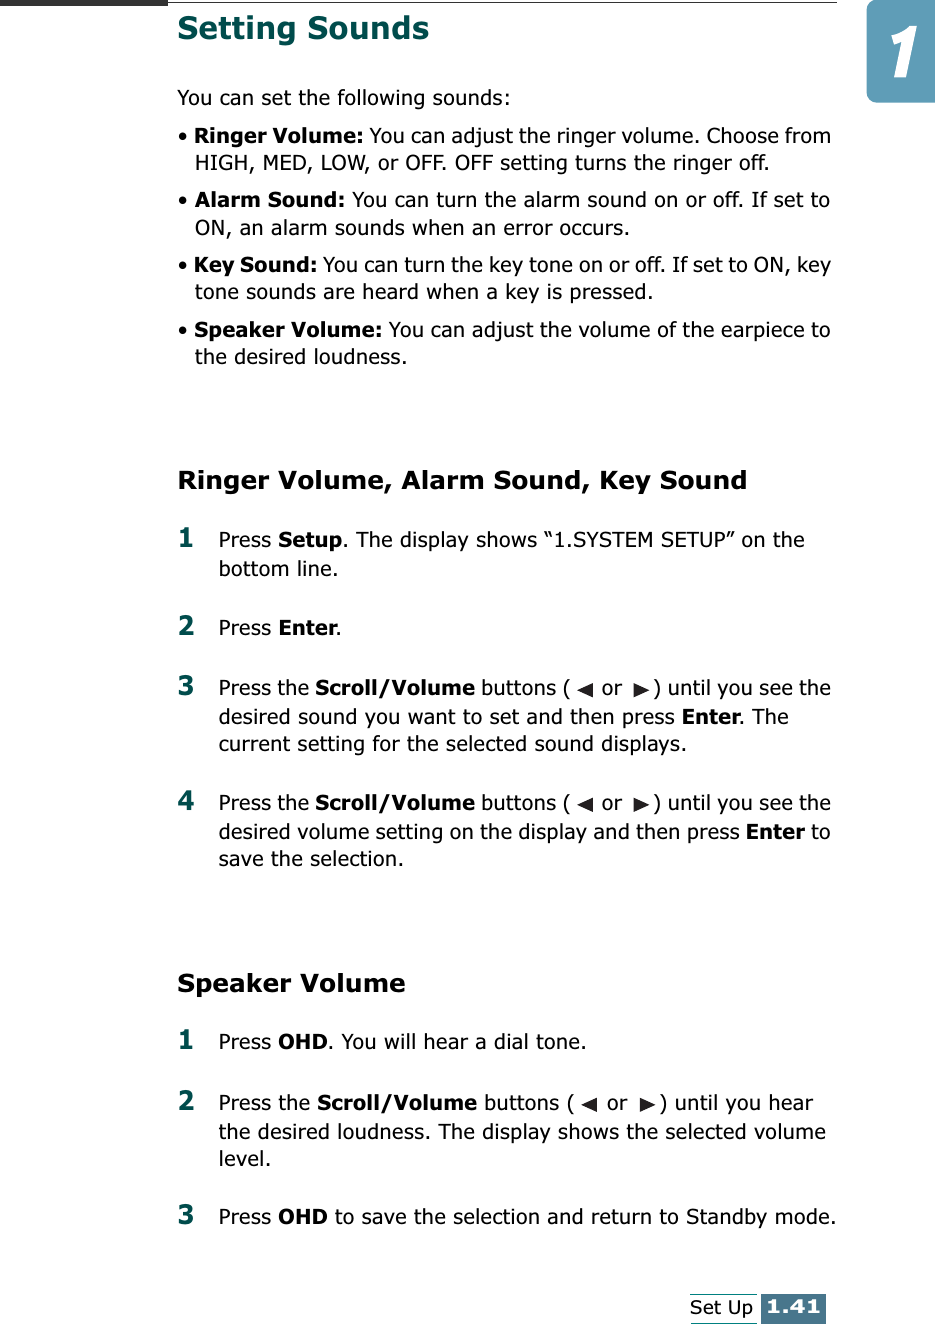 1.41Set UpSetting SoundsYou can set the following sounds:• Ringer Volume: You can adjust the ringer volume. Choose from HIGH, MED, LOW, or OFF. OFF setting turns the ringer off.• Alarm Sound: You can turn the alarm sound on or off. If set to ON, an alarm sounds when an error occurs.• Key Sound: You can turn the key tone on or off. If set to ON, key tone sounds are heard when a key is pressed.• Speaker Volume: You can adjust the volume of the earpiece to the desired loudness. Ringer Volume, Alarm Sound, Key Sound1Press Setup. The display shows “1.SYSTEM SETUP” on the bottom line.2Press Enter. 3Press the Scroll/Volume buttons (  or  ) until you see the desired sound you want to set and then press Enter. The current setting for the selected sound displays.4Press the Scroll/Volume buttons (  or  ) until you see the desired volume setting on the display and then press Enter to save the selection. Speaker Volume1Press OHD. You will hear a dial tone.2Press the Scroll/Volume buttons (  or  ) until you hear the desired loudness. The display shows the selected volume level.3Press OHD to save the selection and return to Standby mode.